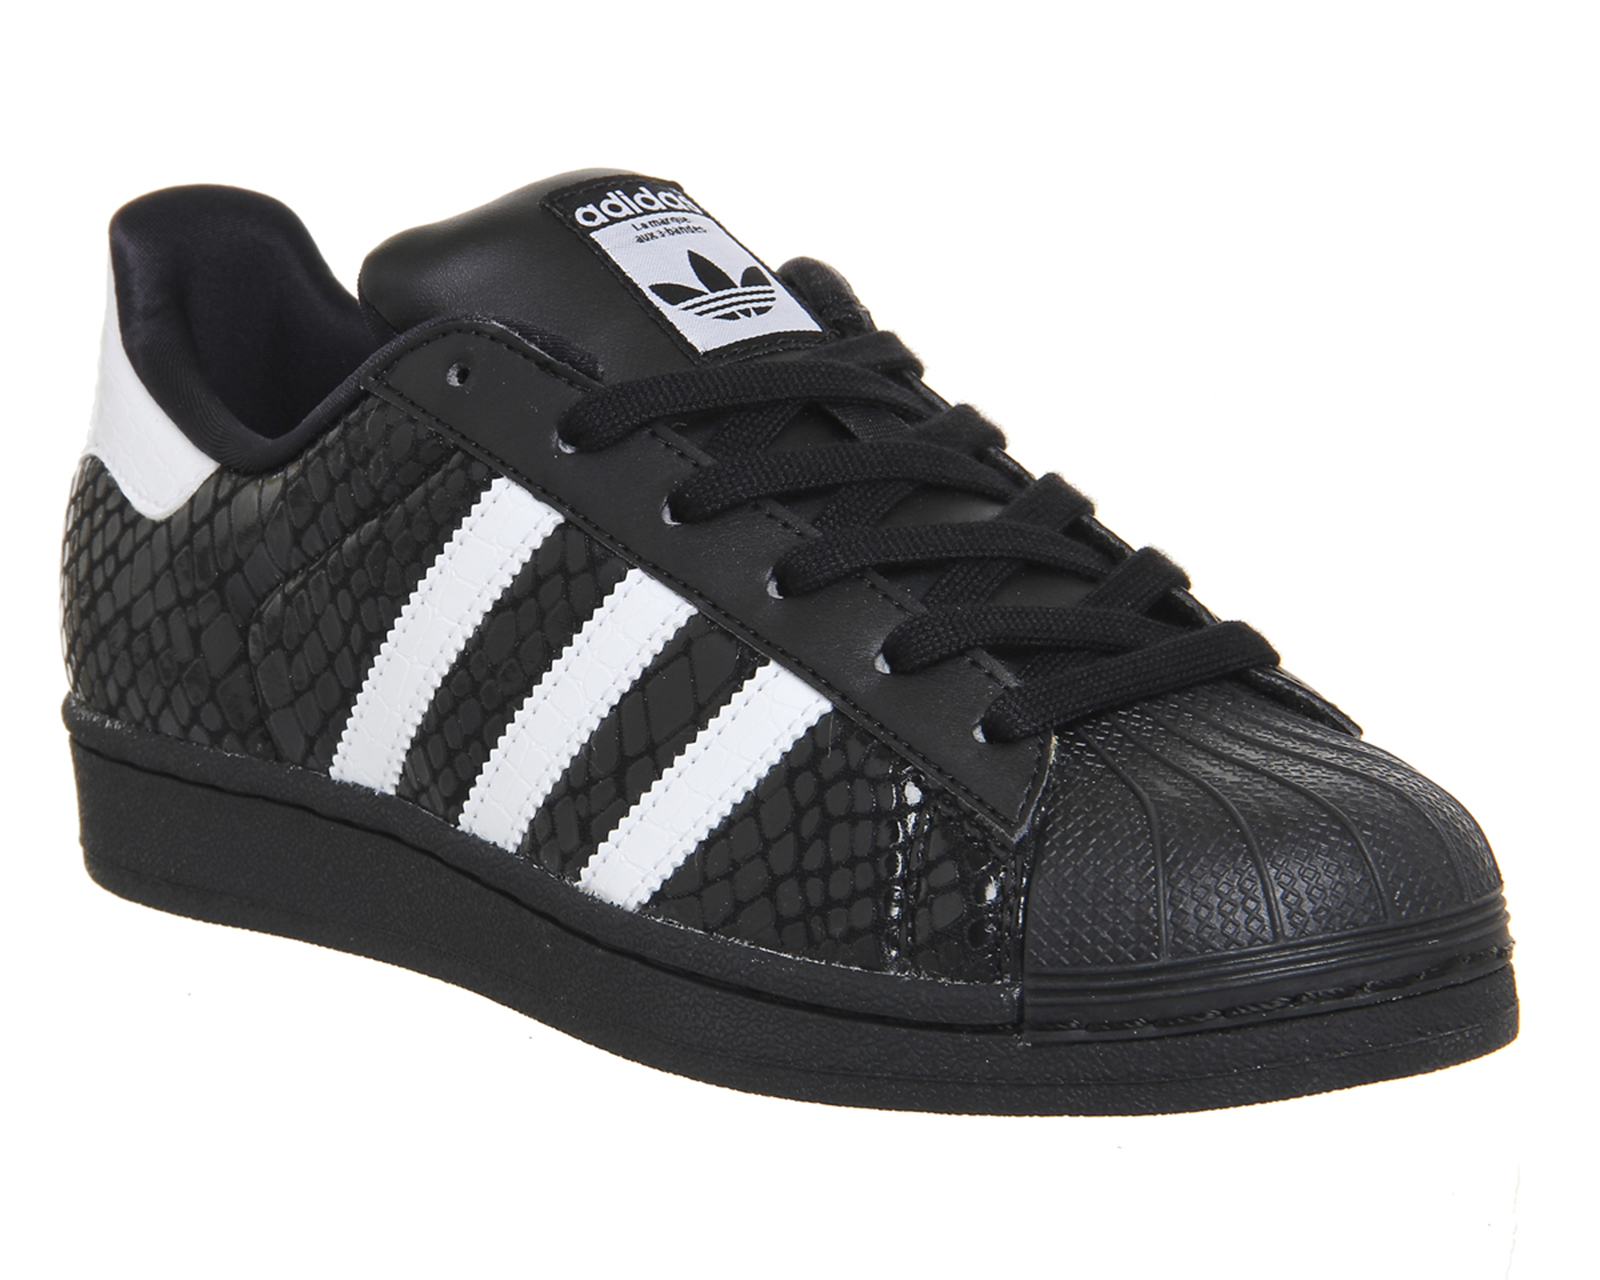 adidas superstar 1 2 difference